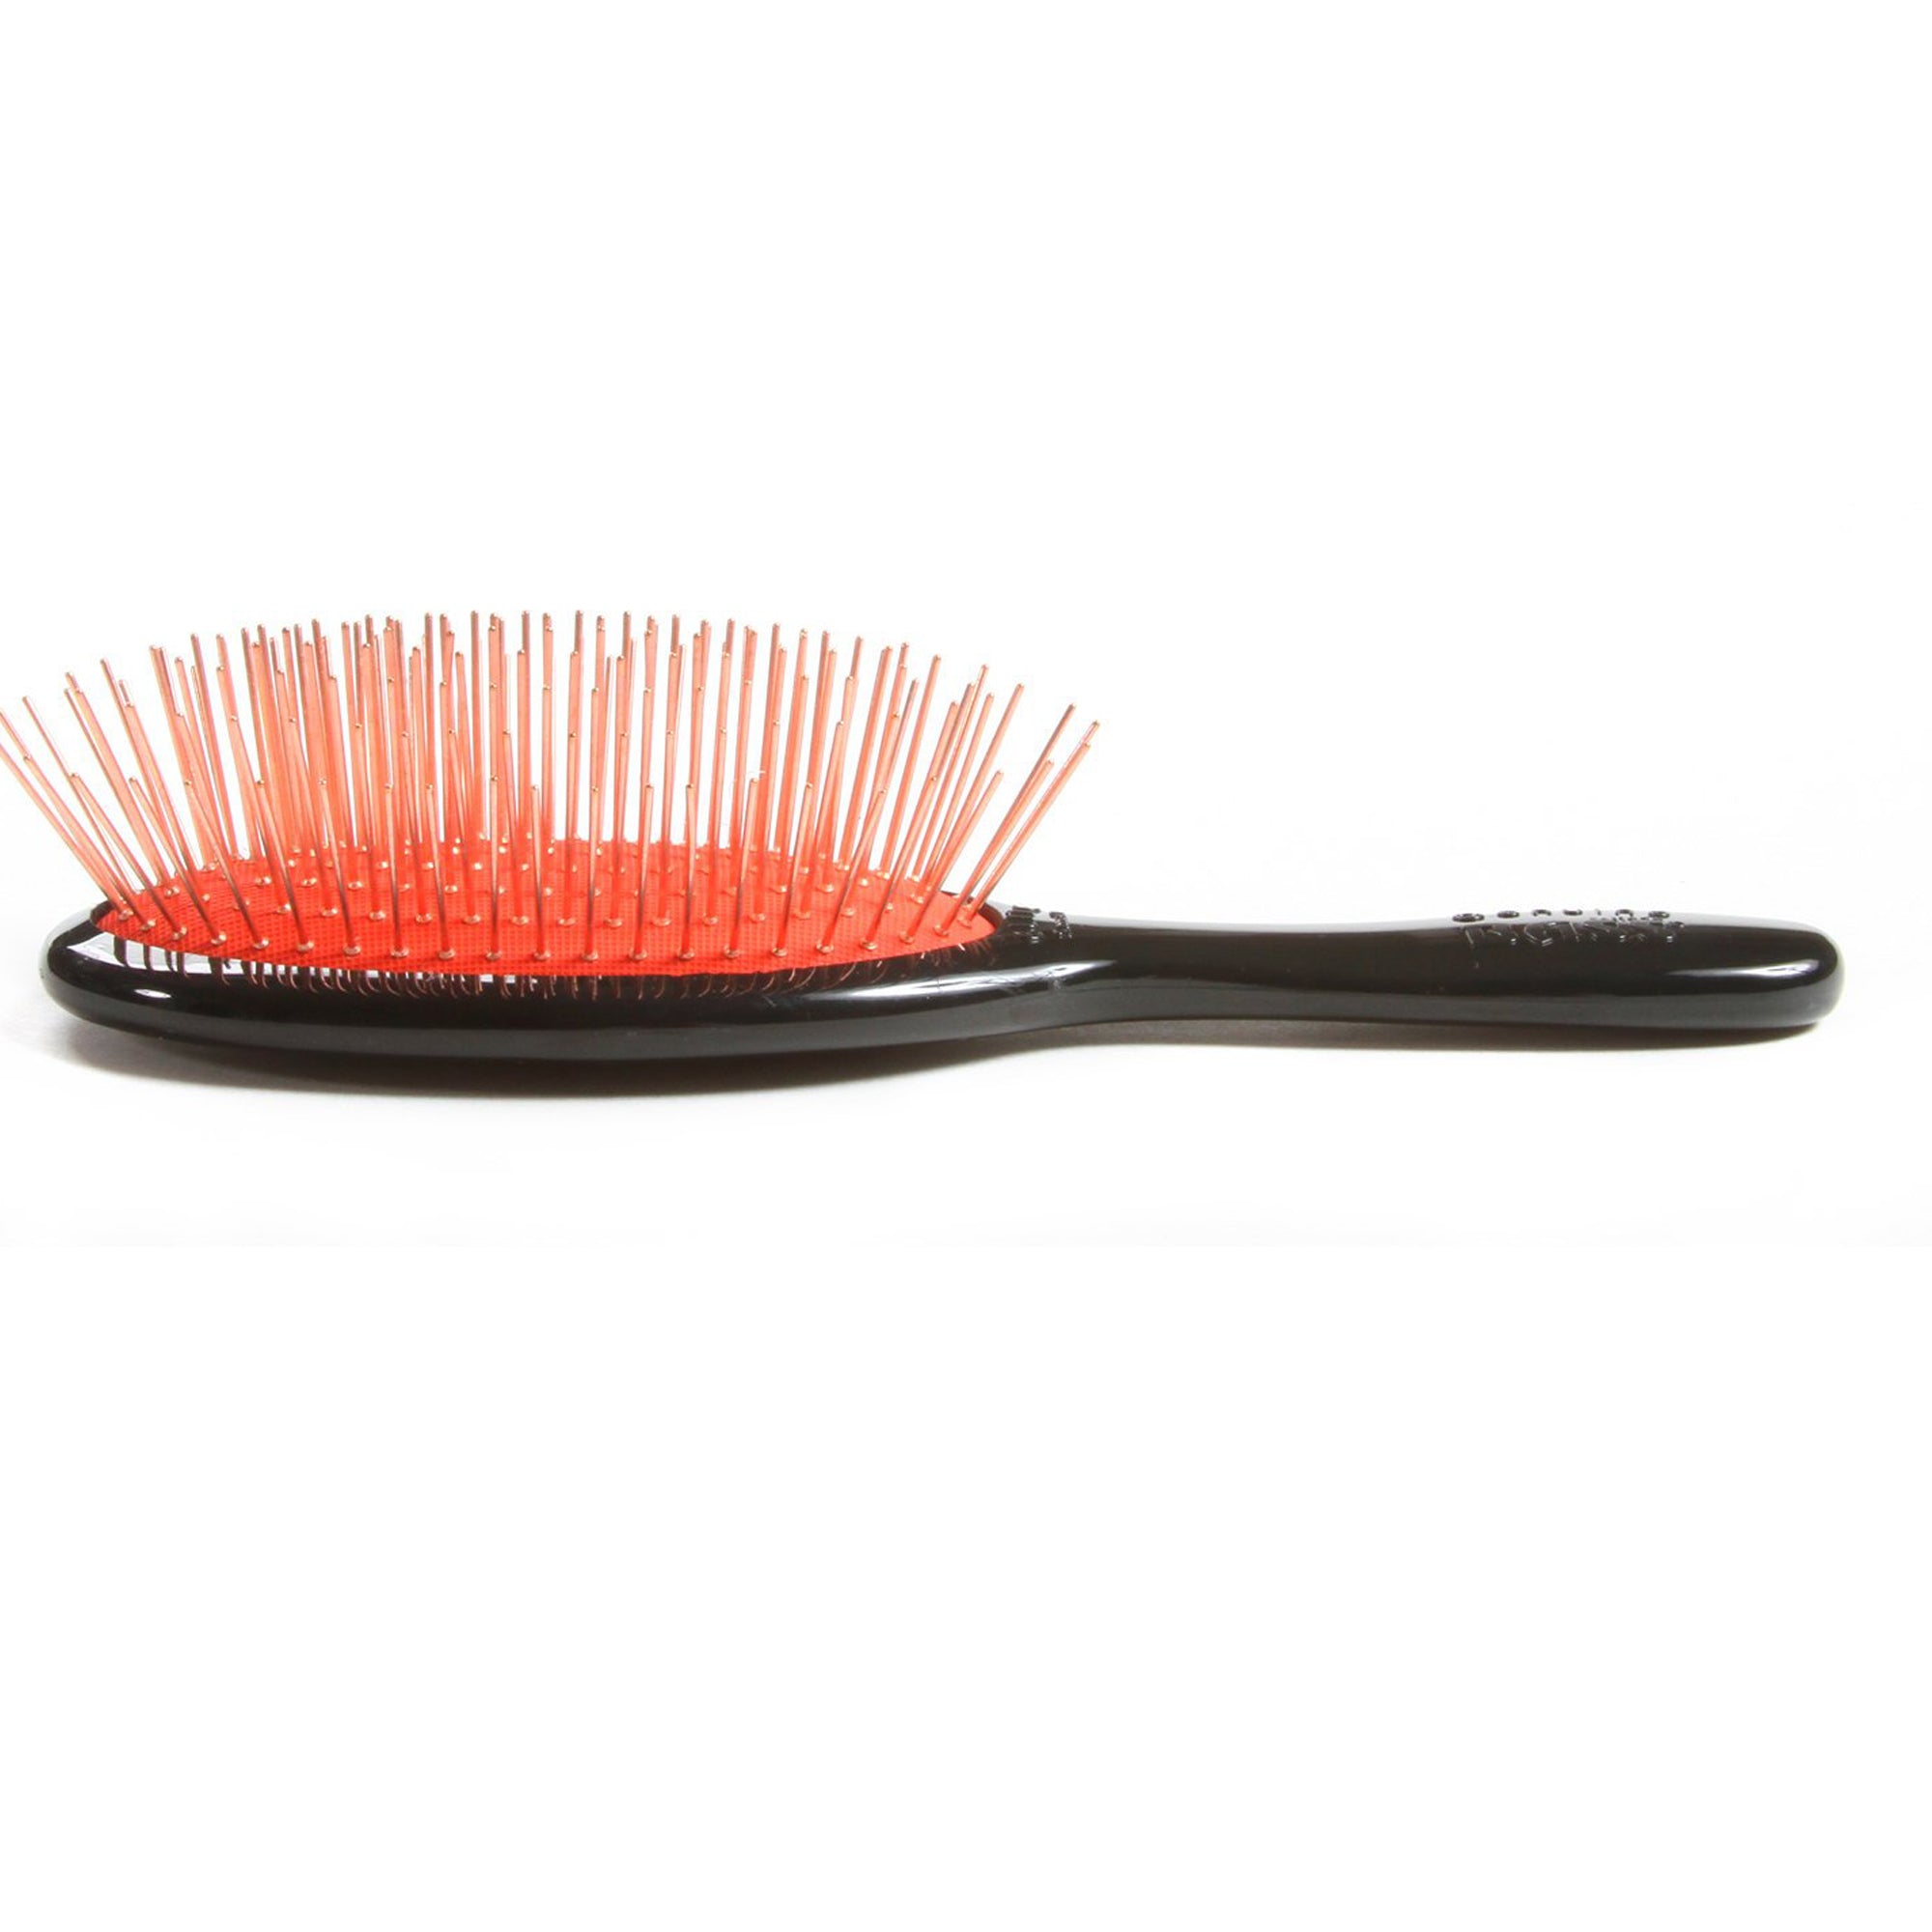 Bass BS09 Small Oval Hairbrush with Ultra Premium Alloy Pins